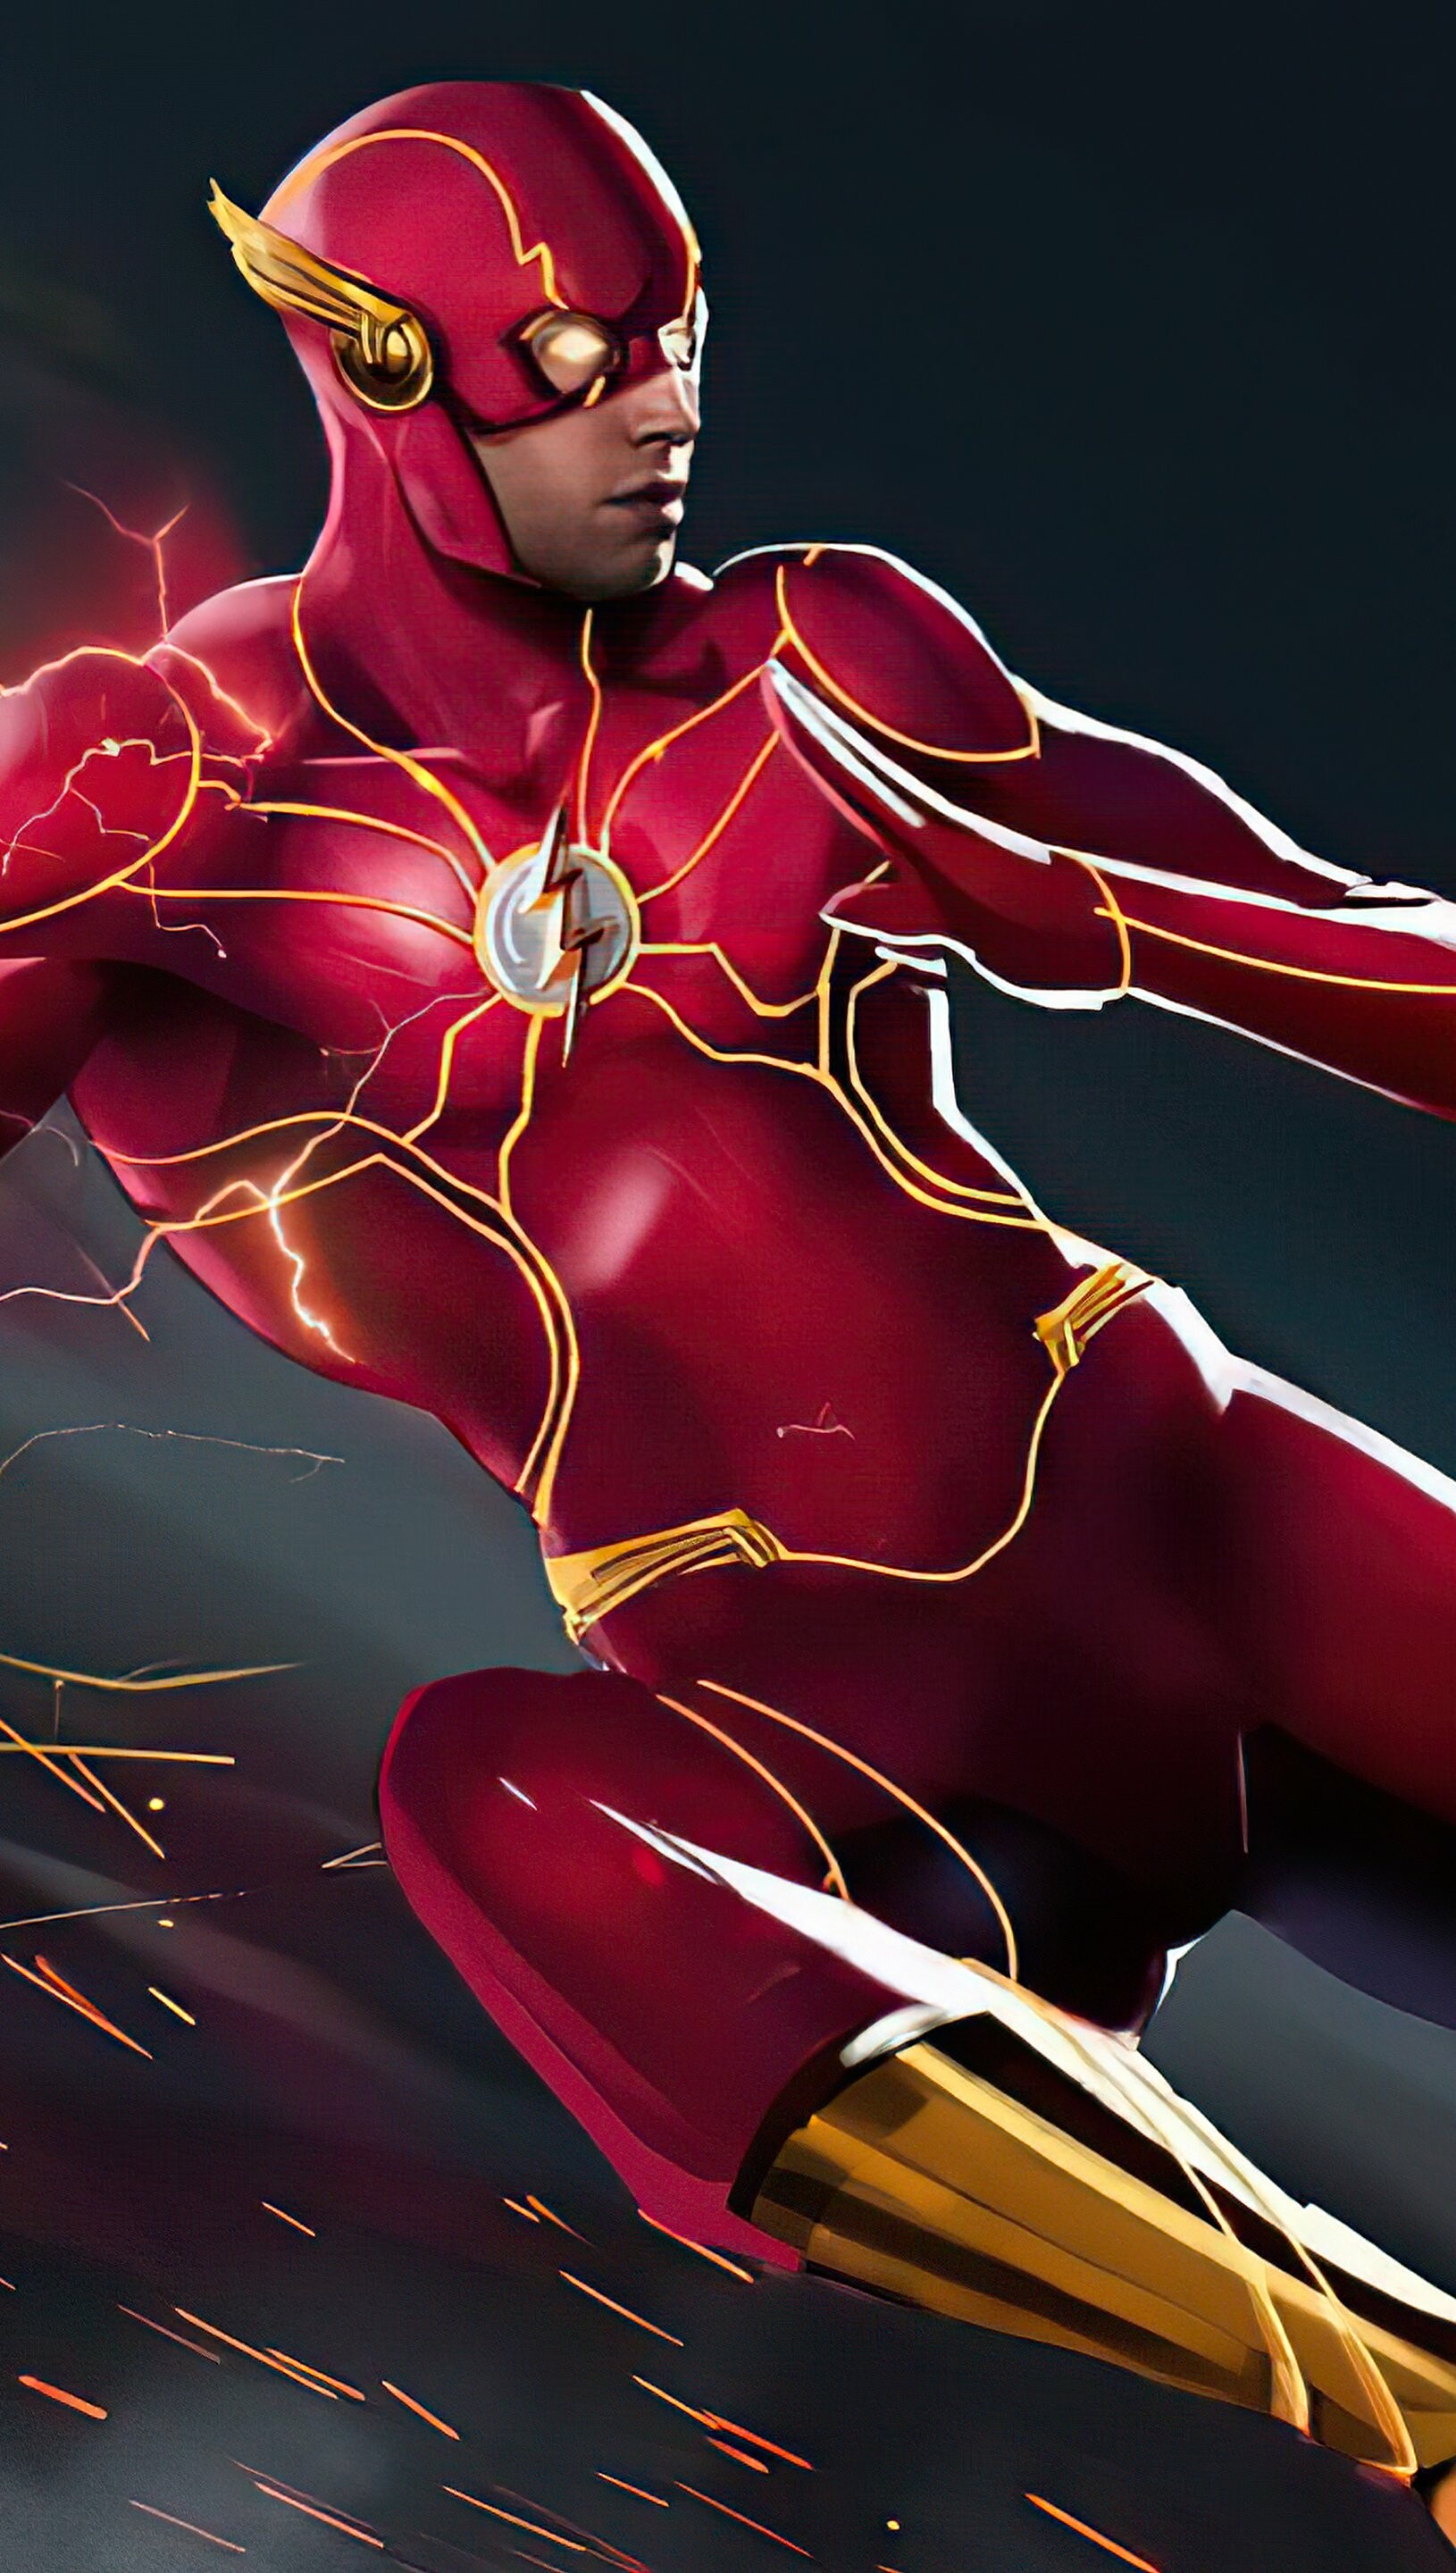 Flash (DC): Superhero fighting against evil using his super-speed and a dedicated sense of heroism. 1630x2880 HD Wallpaper.